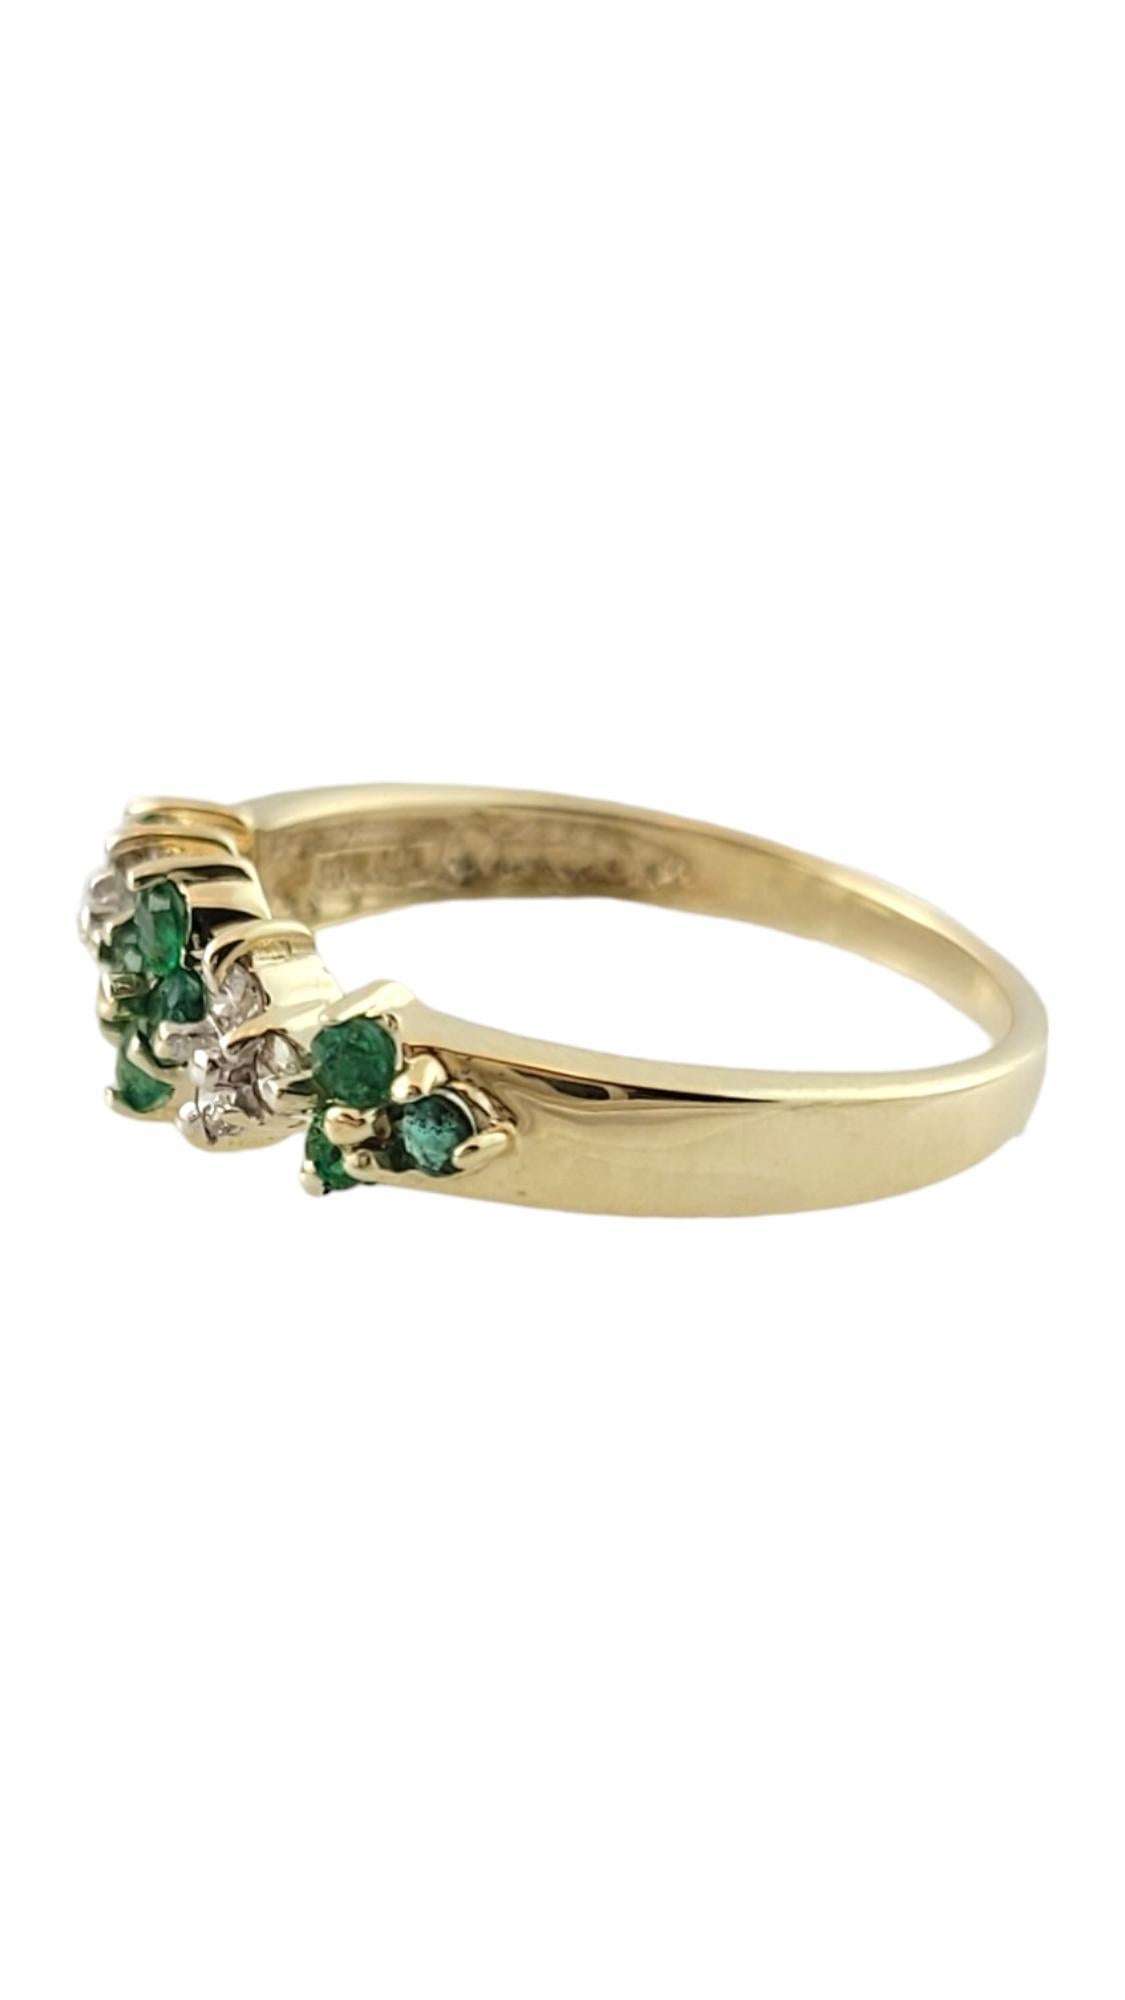 Vintage 10K Yellow Gold Natural Emerald and diamond Ring Size 7-7.25

This gold ring features 10 gorgeous lab tested green emeralds and 6 sparkling round brilliant cut diamonds!

Approximate total diamond weight: .06 cts

Diamond color: J-K

diamond